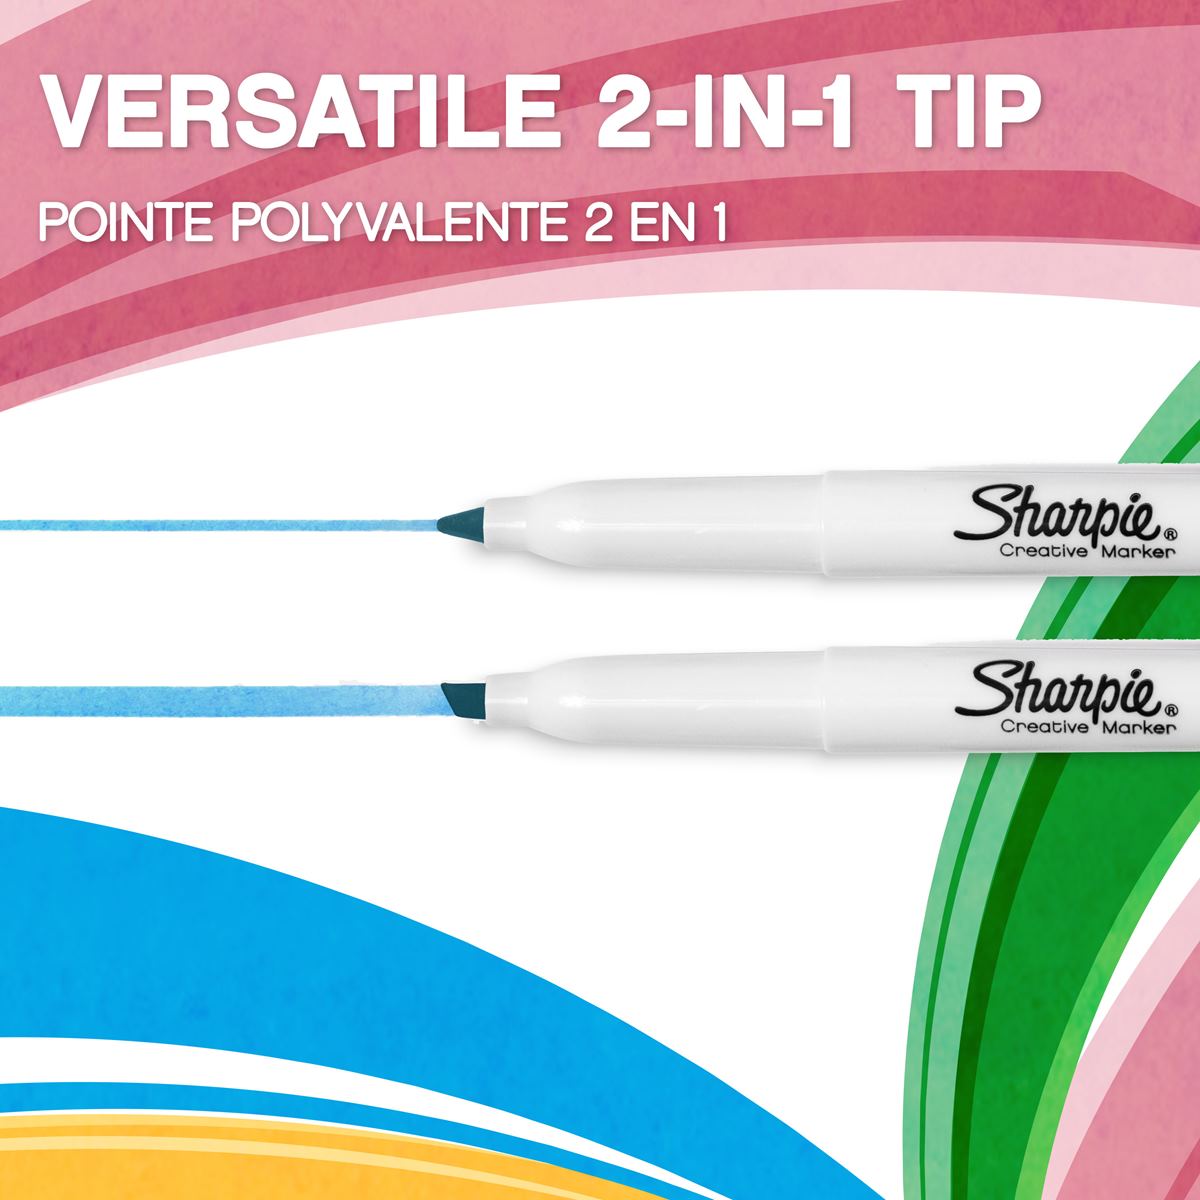 Sharpie S-Note Pastel Highlighters - Pack of 4